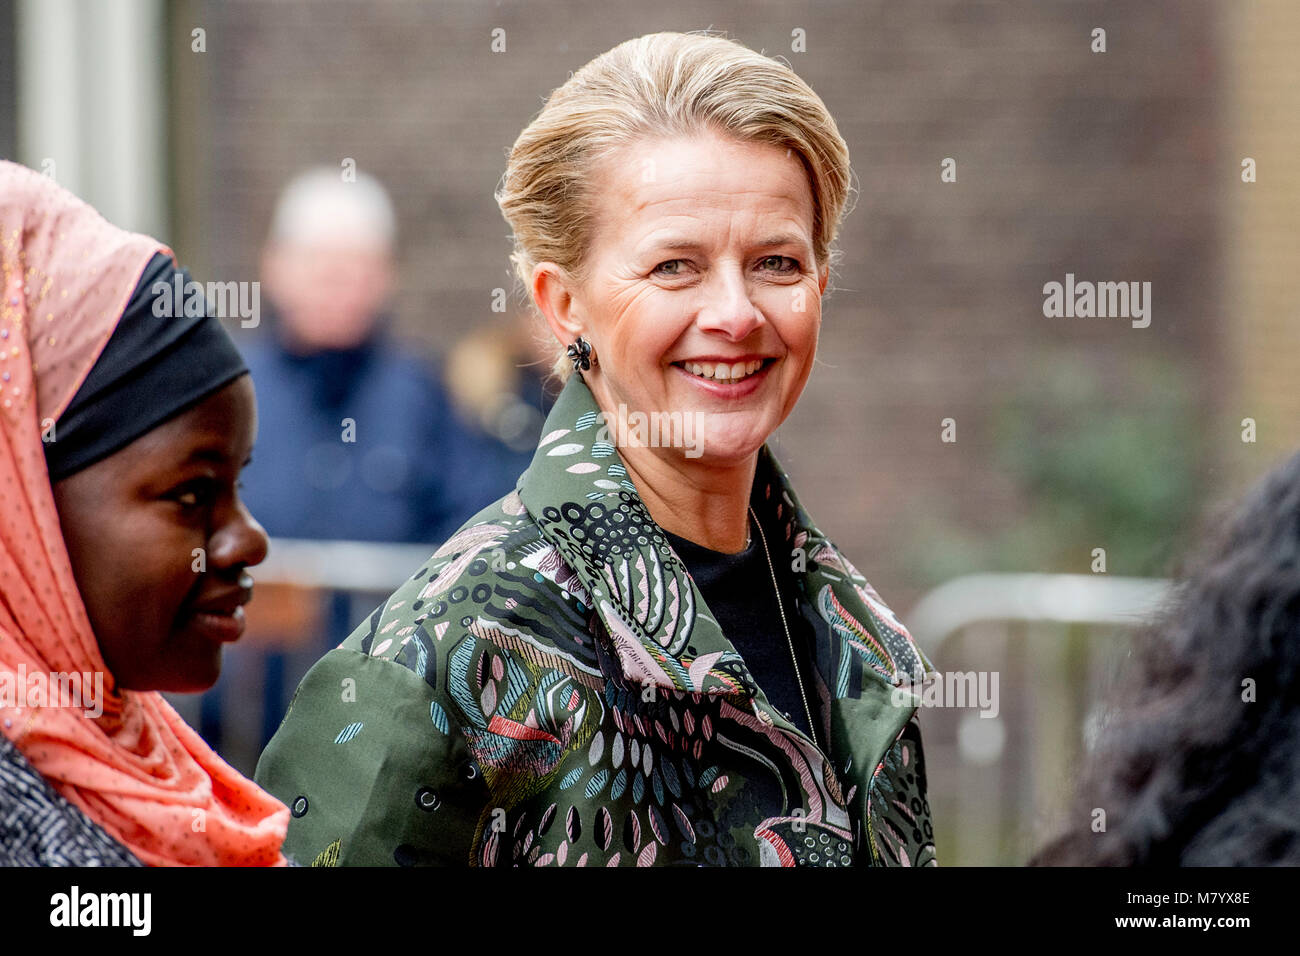 Vlaardingen, The Netherlands. 13th Mar, 2018. Vlaardingen, The Netherlands, 13 March 2018.Princess Mabel of The Netherlands receives the Geuzenpenning award for her work for Girls Not Brides in the Grote Kerk in Vlaardingen, The Netherlands, 13 March 2018. Girls Not Brides is committed to ending child marriage and enabling girls to fulfill their potential. Credit: Patrick van Katwijk /POINT DE VUE OUT -NO WIRE SERVICE- Credit: Patrick van Katwijk/Dutch Photo Press/dpa Credit: dpa picture alliance/Alamy Live News/dpa/Alamy Live News Stock Photo